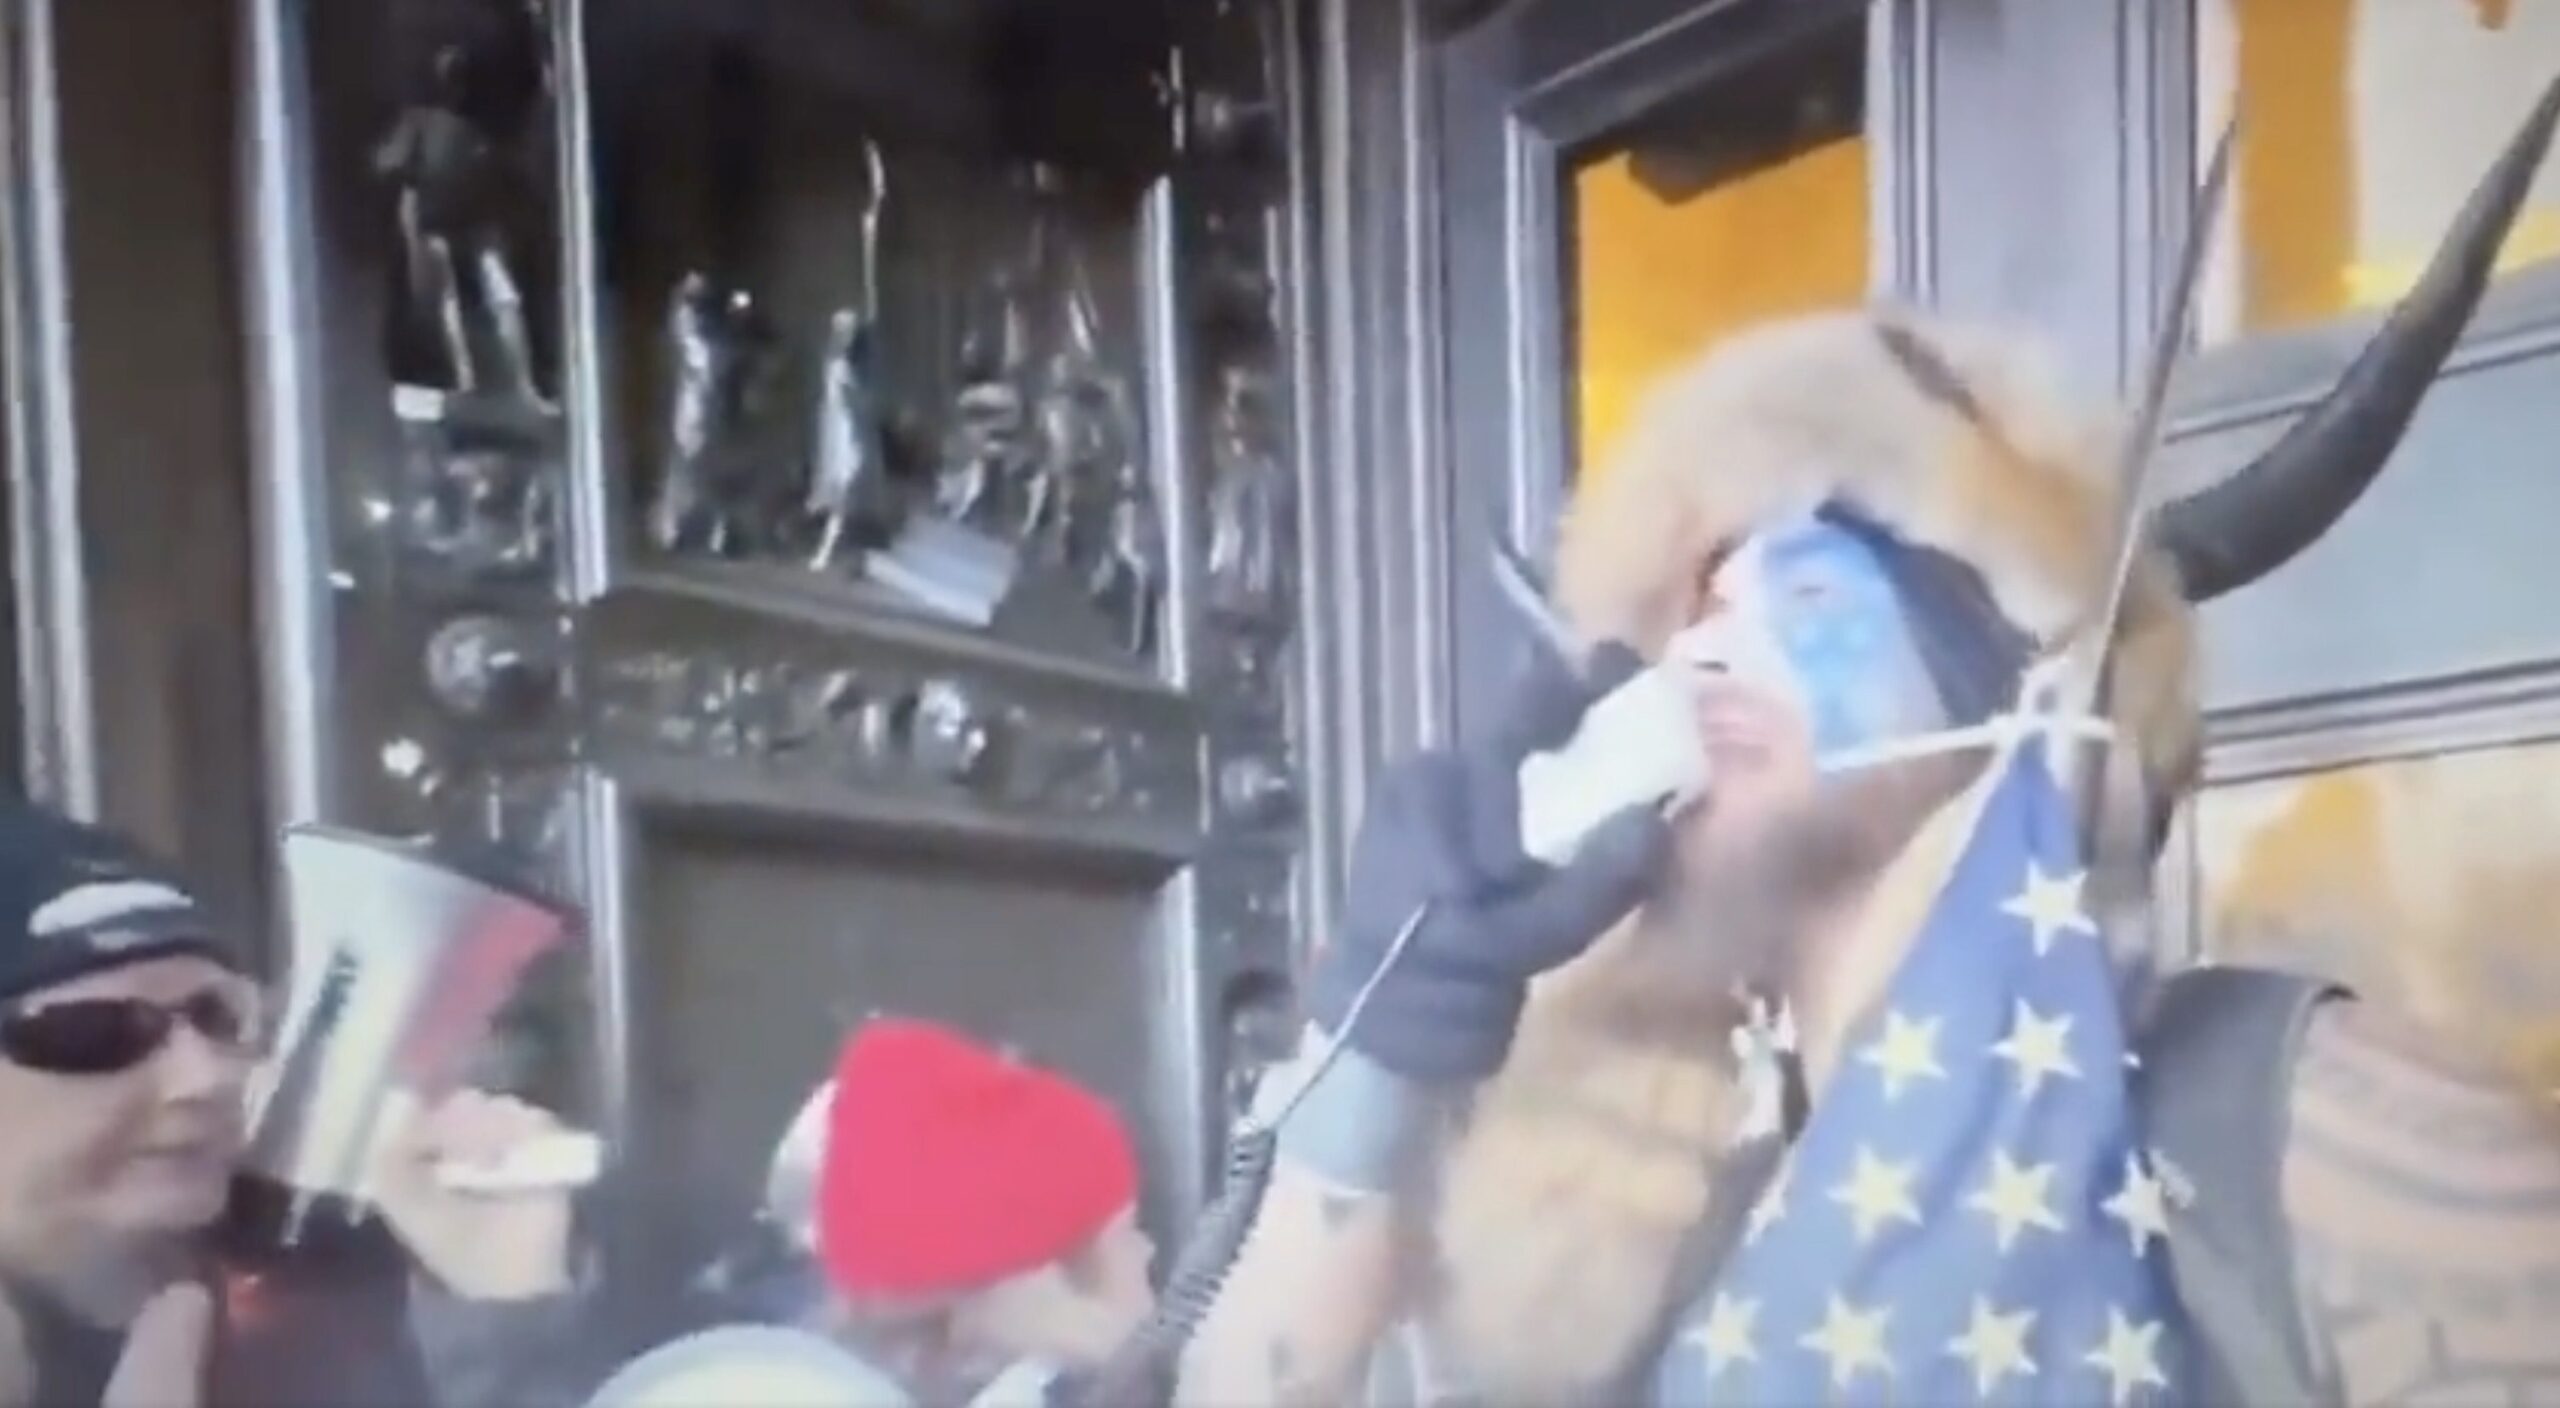 Video of Jacob Chansley "QAnon Shaman" Reading Trump's Tweet to Protesters Resurfaces - Telling Them to "Go Home" and "Stay Peaceful" | The Gateway Pundit | by Jim Hoft